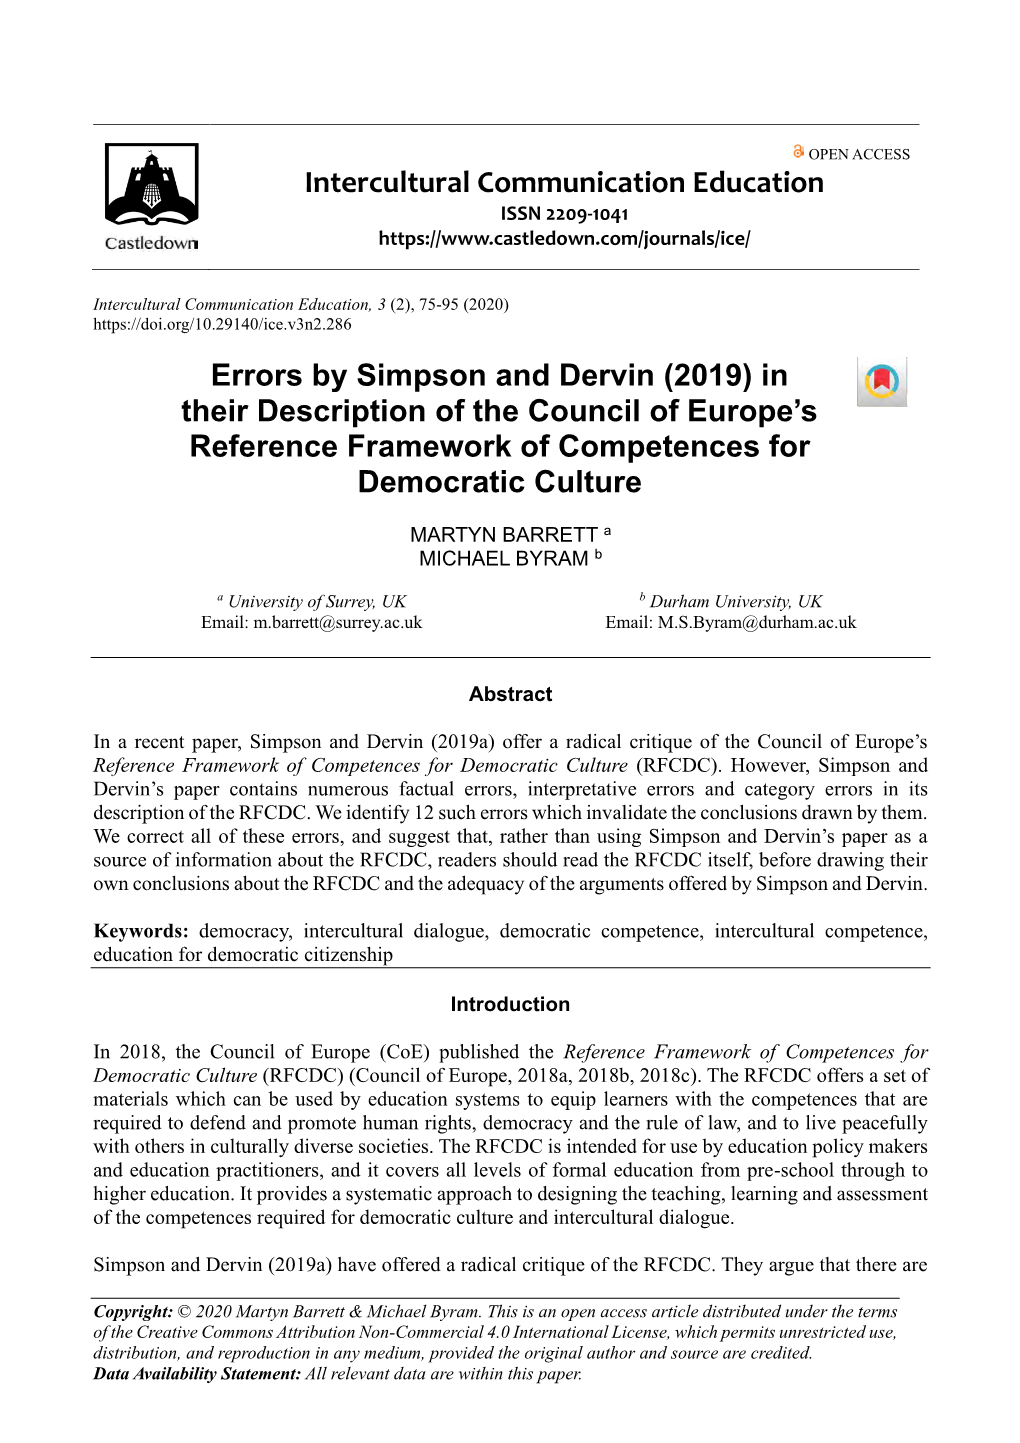 Errors by Simpson and Dervin (2019) in Their Description of the Council of Europe’S Reference Framework of Competences for Democratic Culture